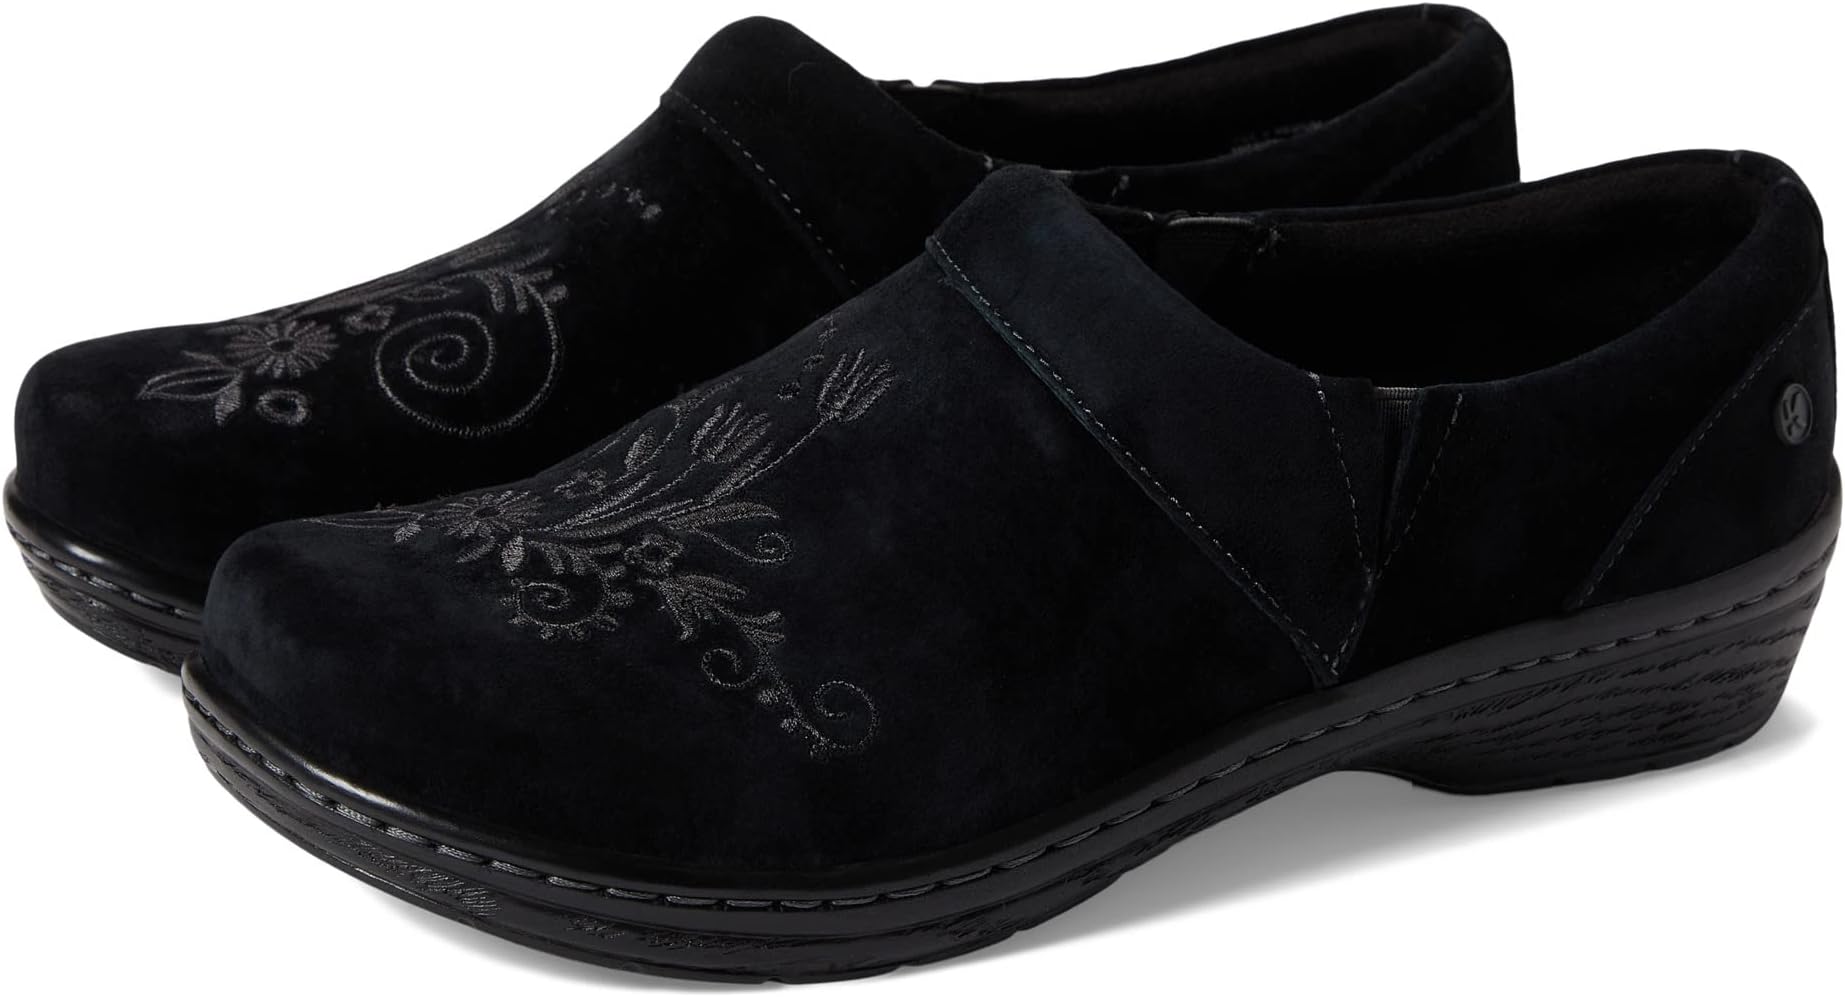 Сабо Mission Klogs Footwear, цвет Black Suede Embroidery